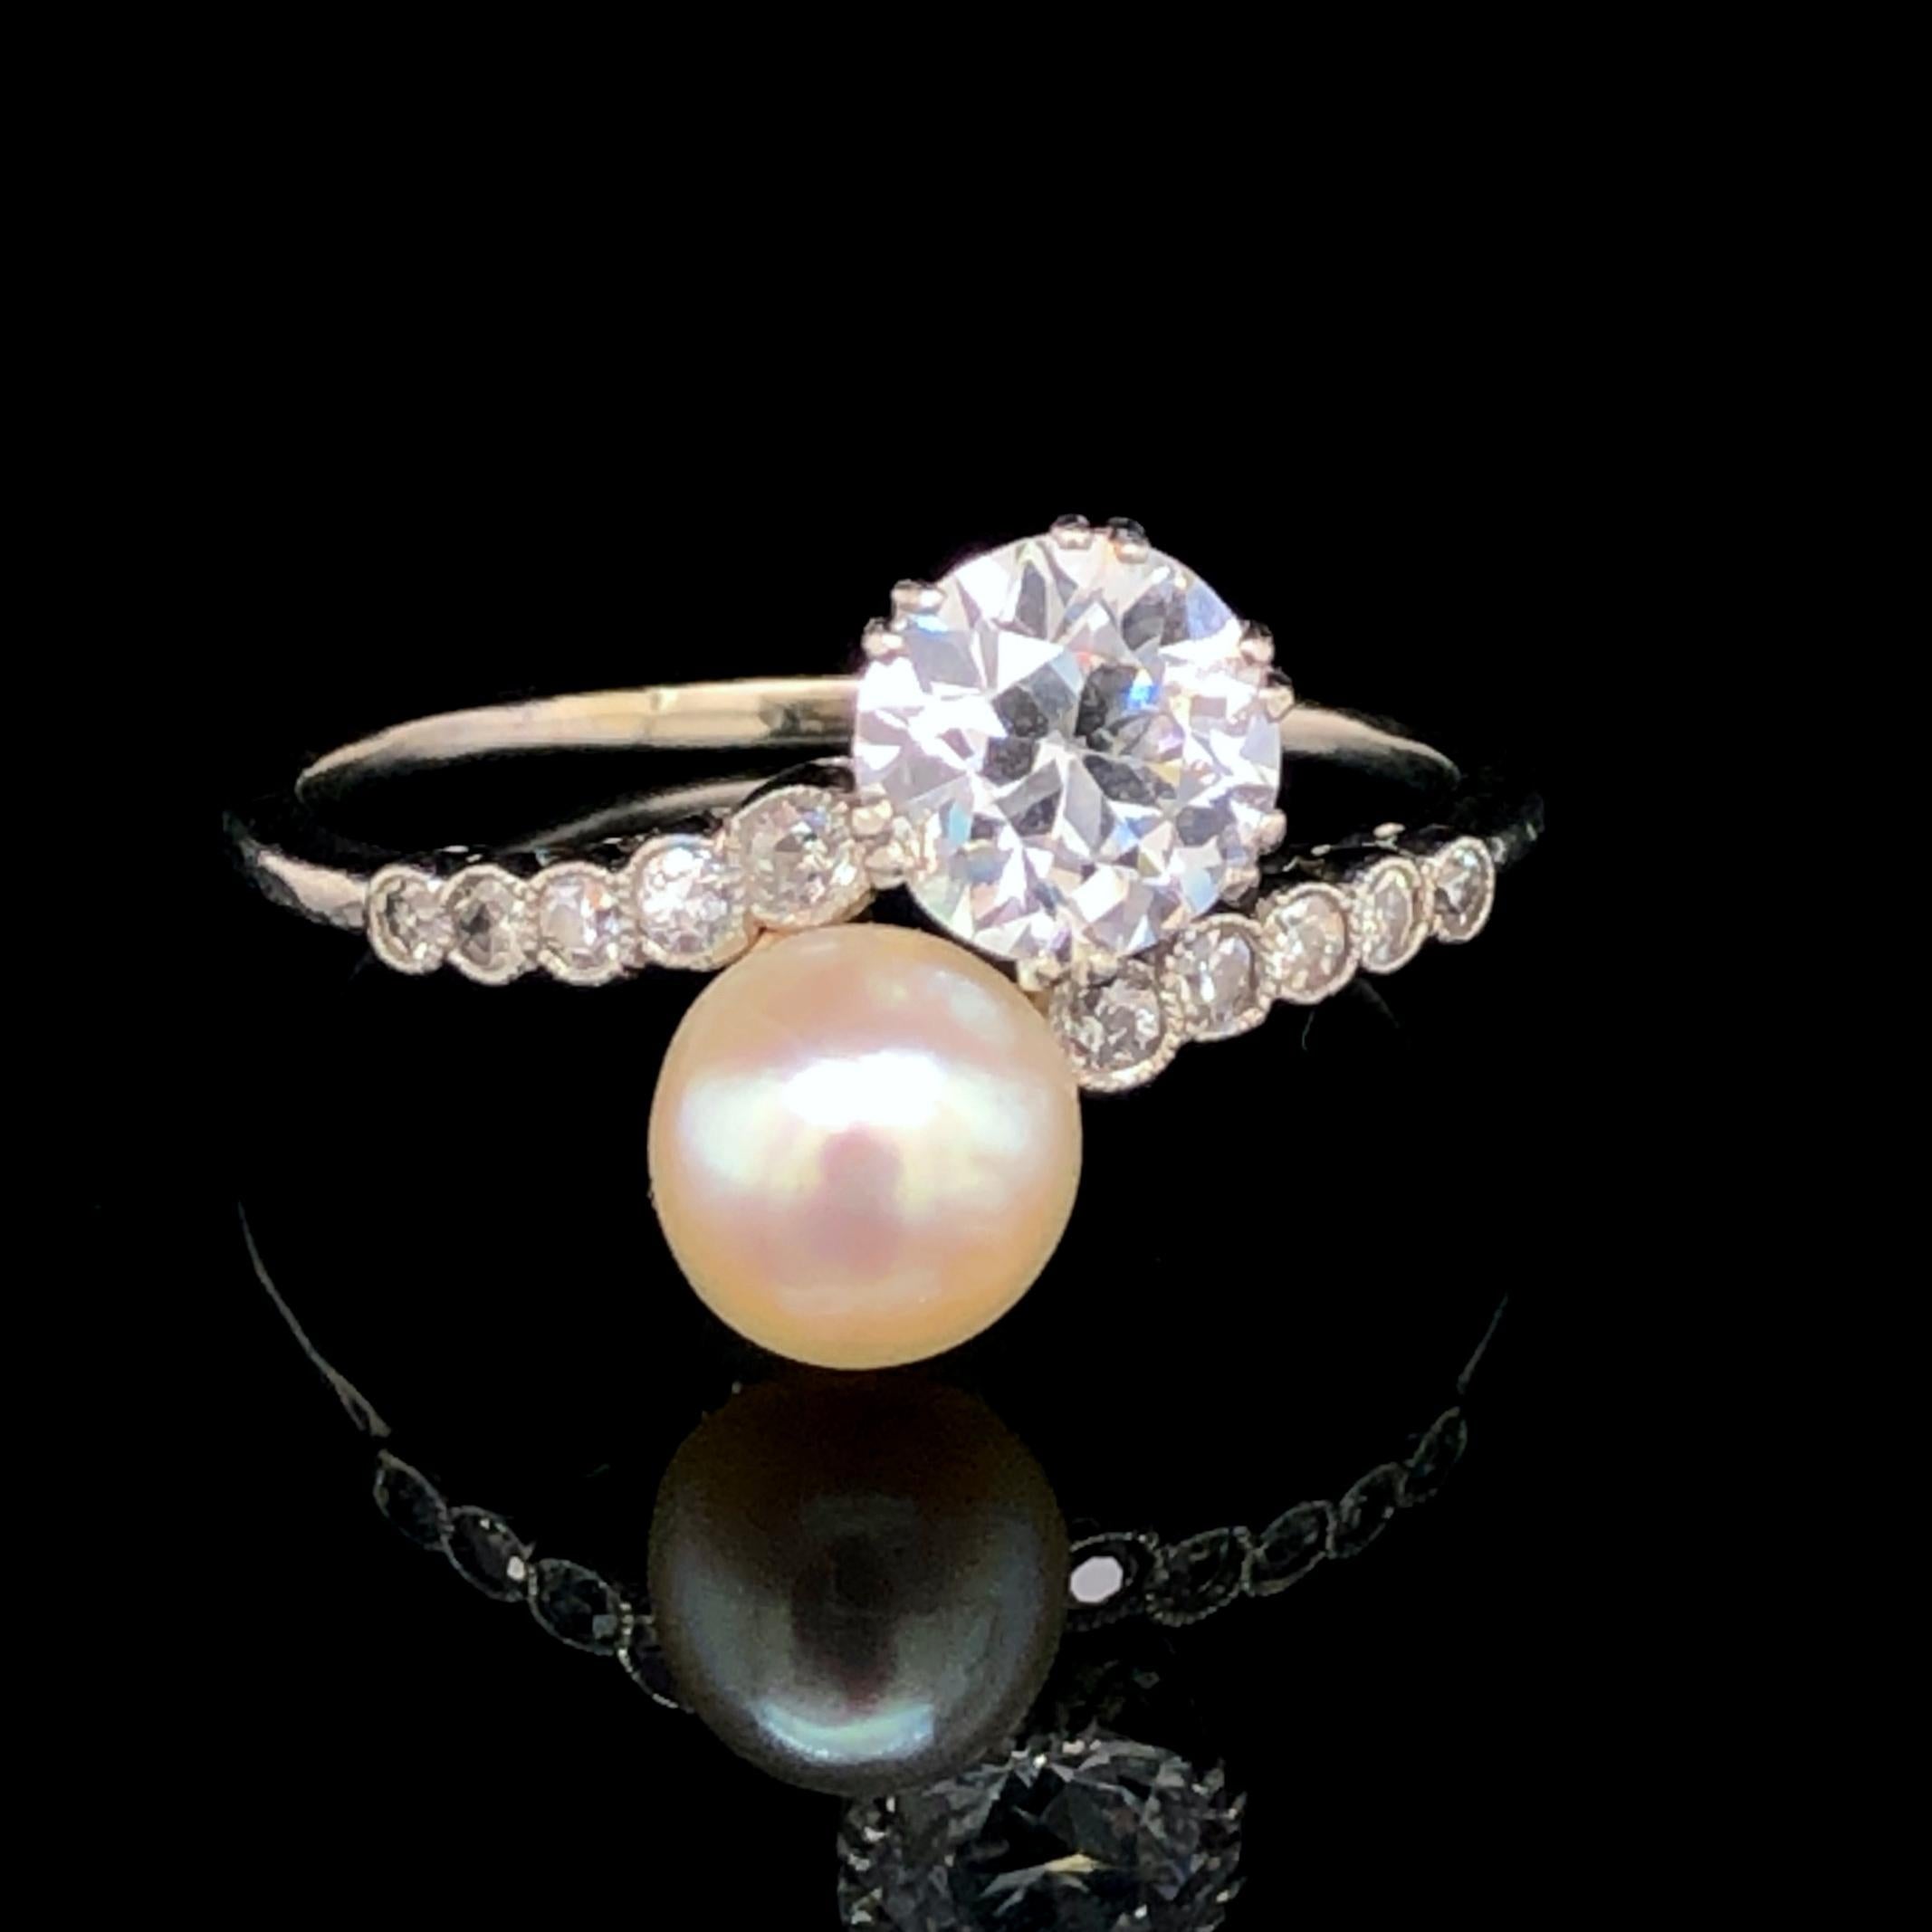 A lovely Edwardian natural pearl and diamond toi et moi crossover ring in platinum, ca. 1900s. 

The orient pearl button is a natural saltwater pearl with a beautiful lustre, measuring 7mm and accompanied by a gemological report from DSEF. It is set